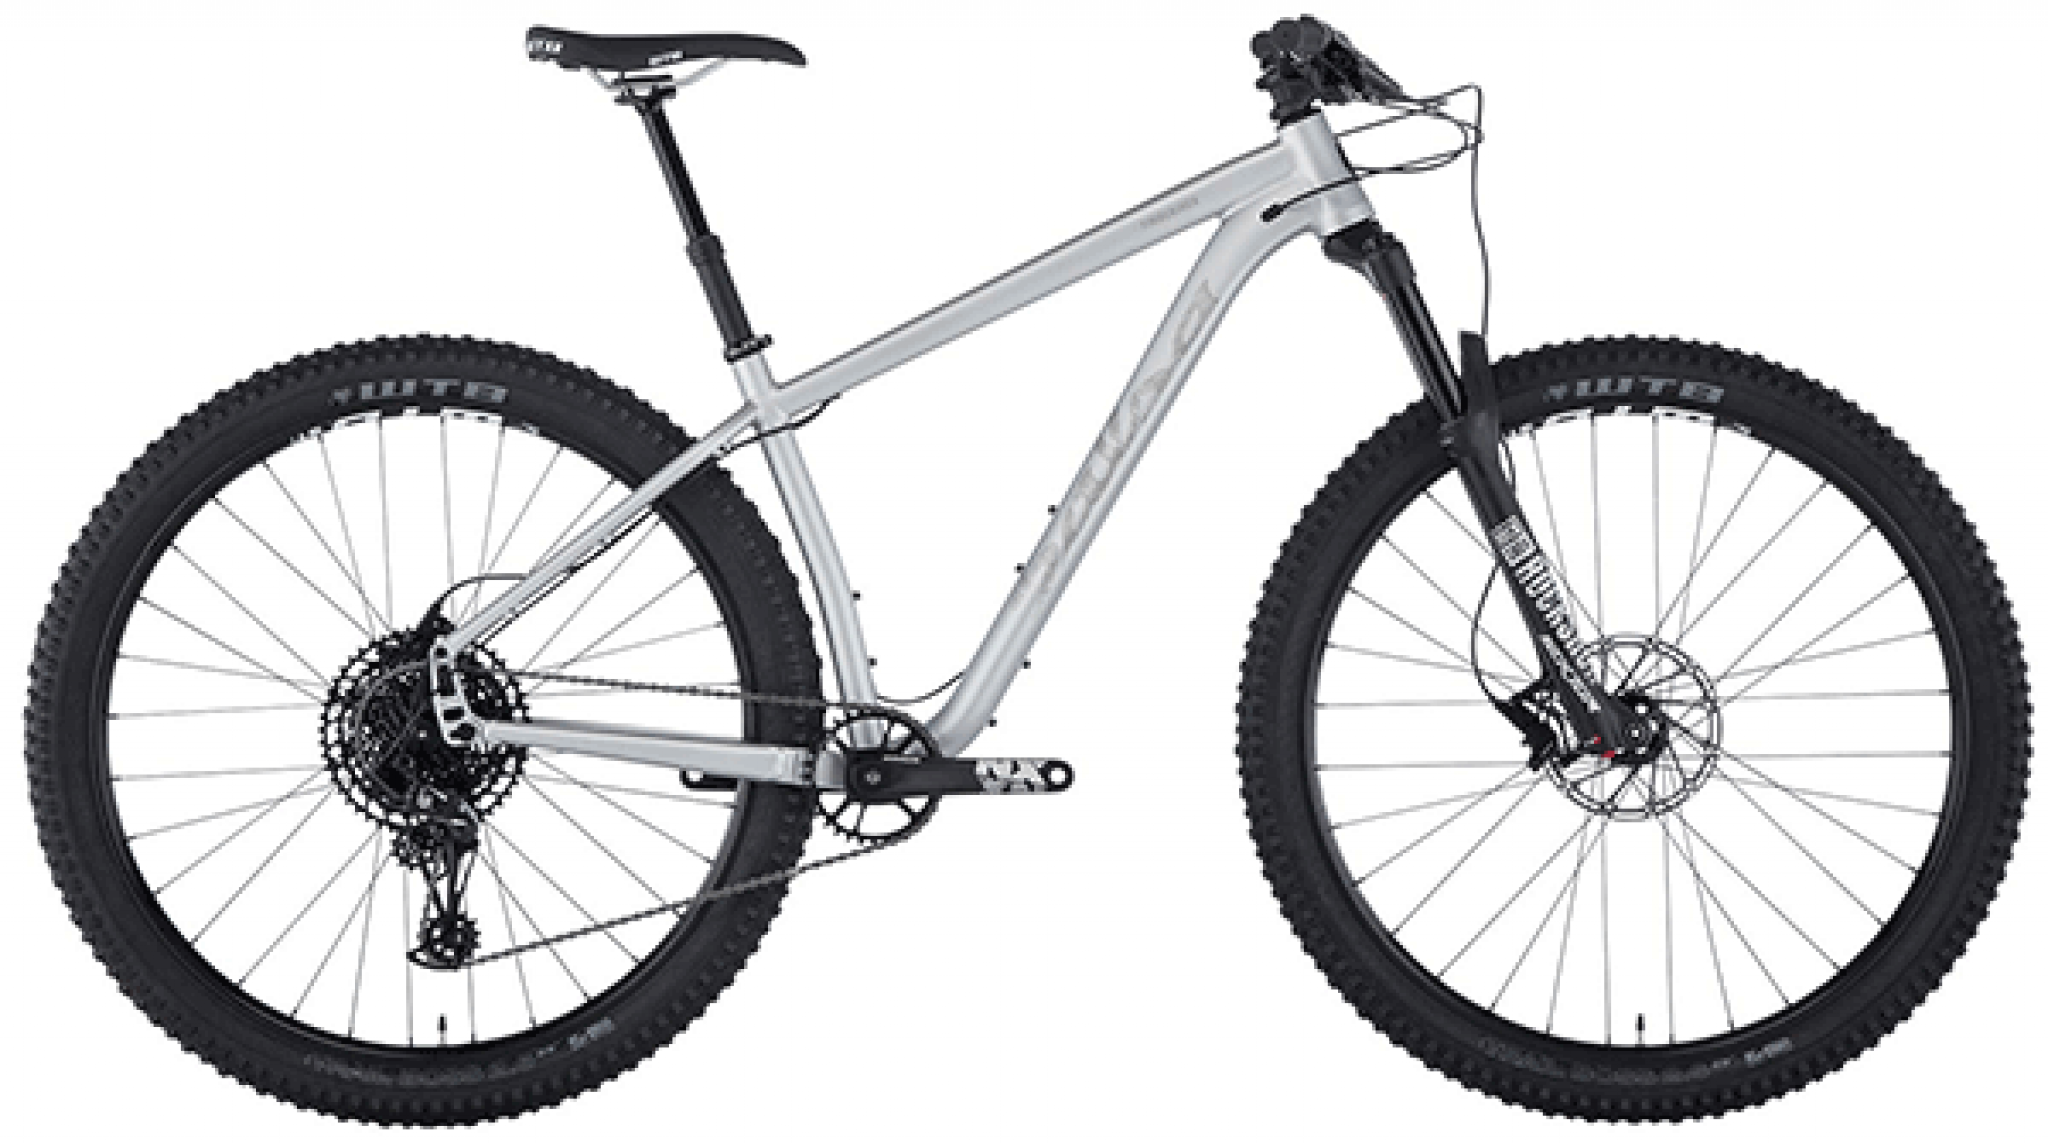 Salsa Timberjack The Uncanny Hardtail for Trails [Series Overview]